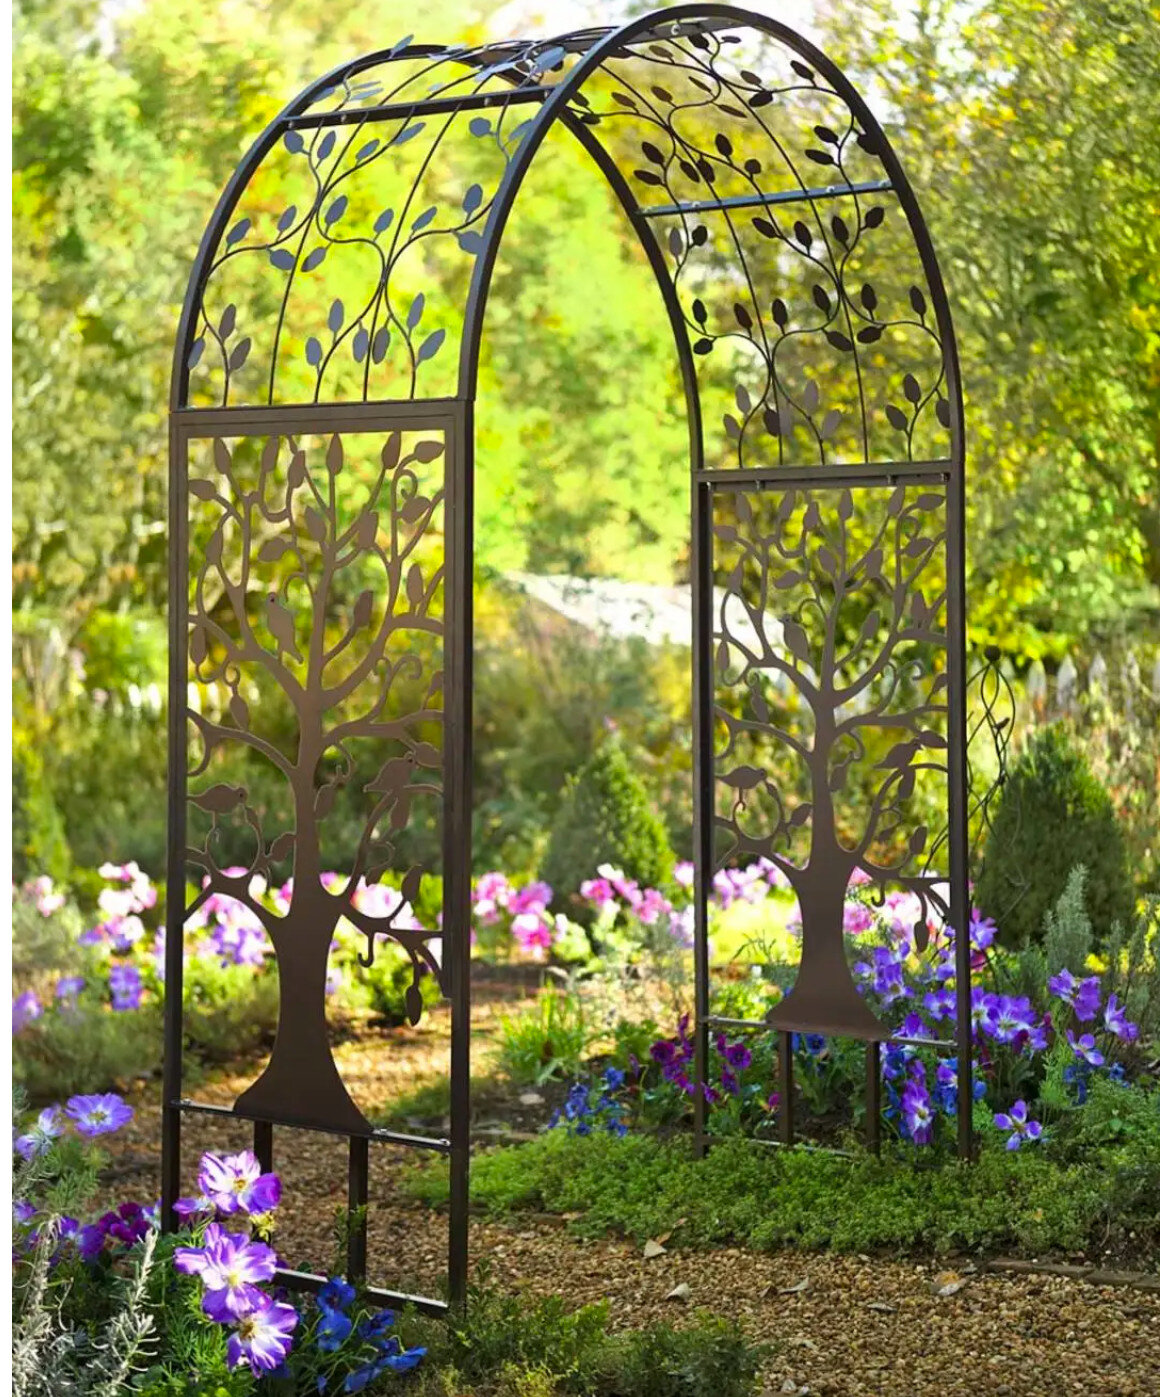 The Tree of Life arbor is an impressive, well made arbor that fits peerfectly into a woodland garden.